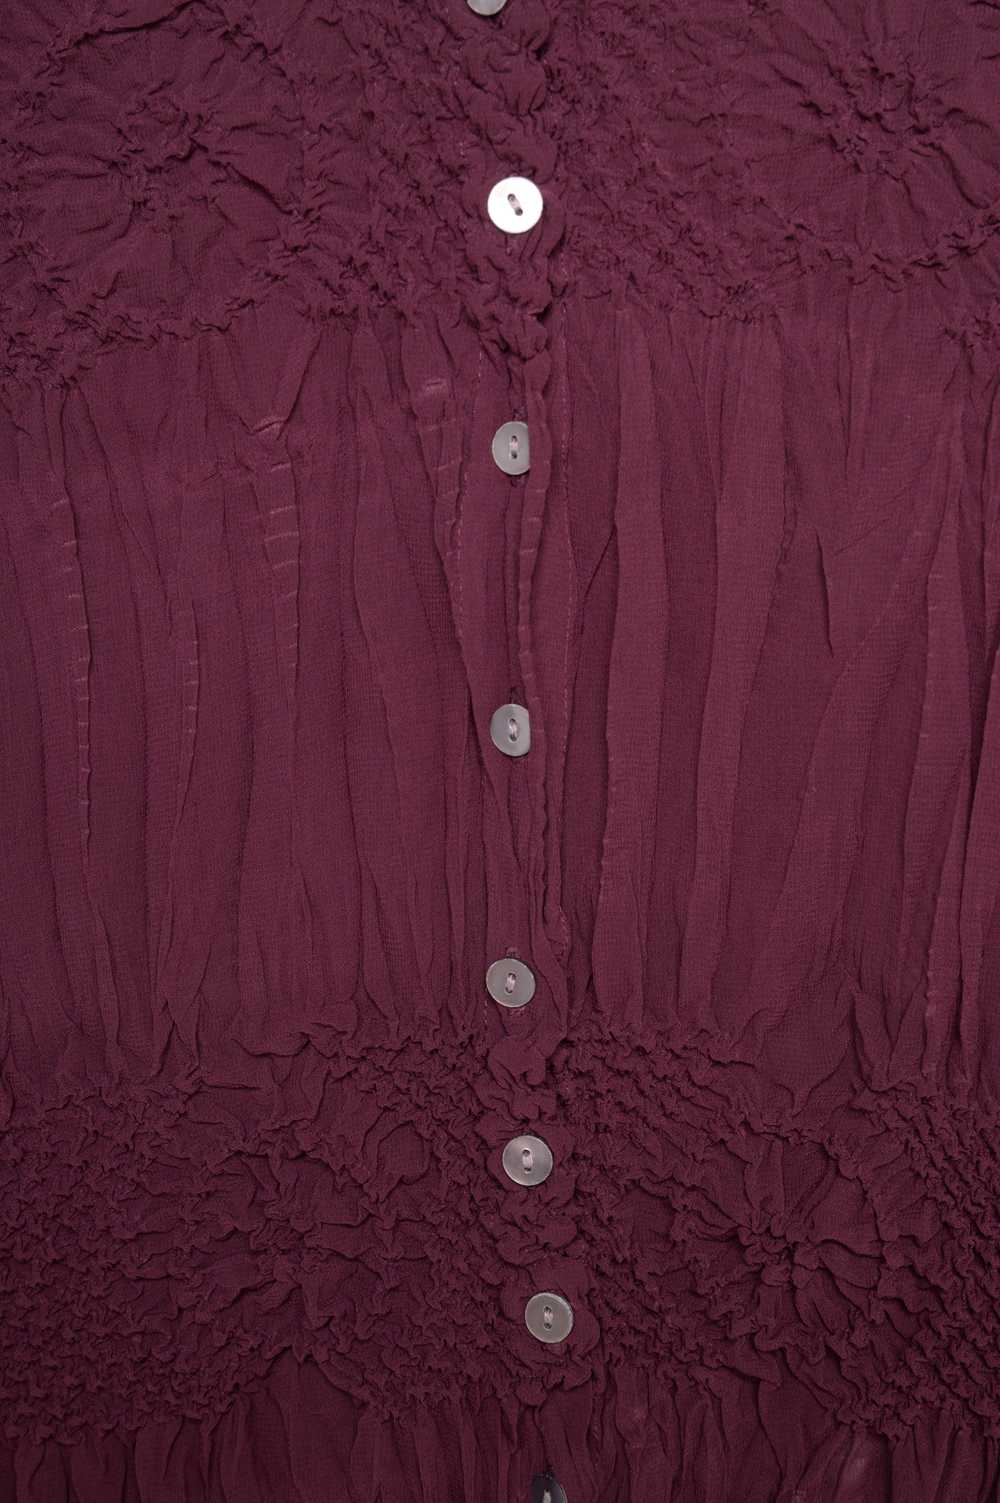 1970s Sheer Button Top - image 3